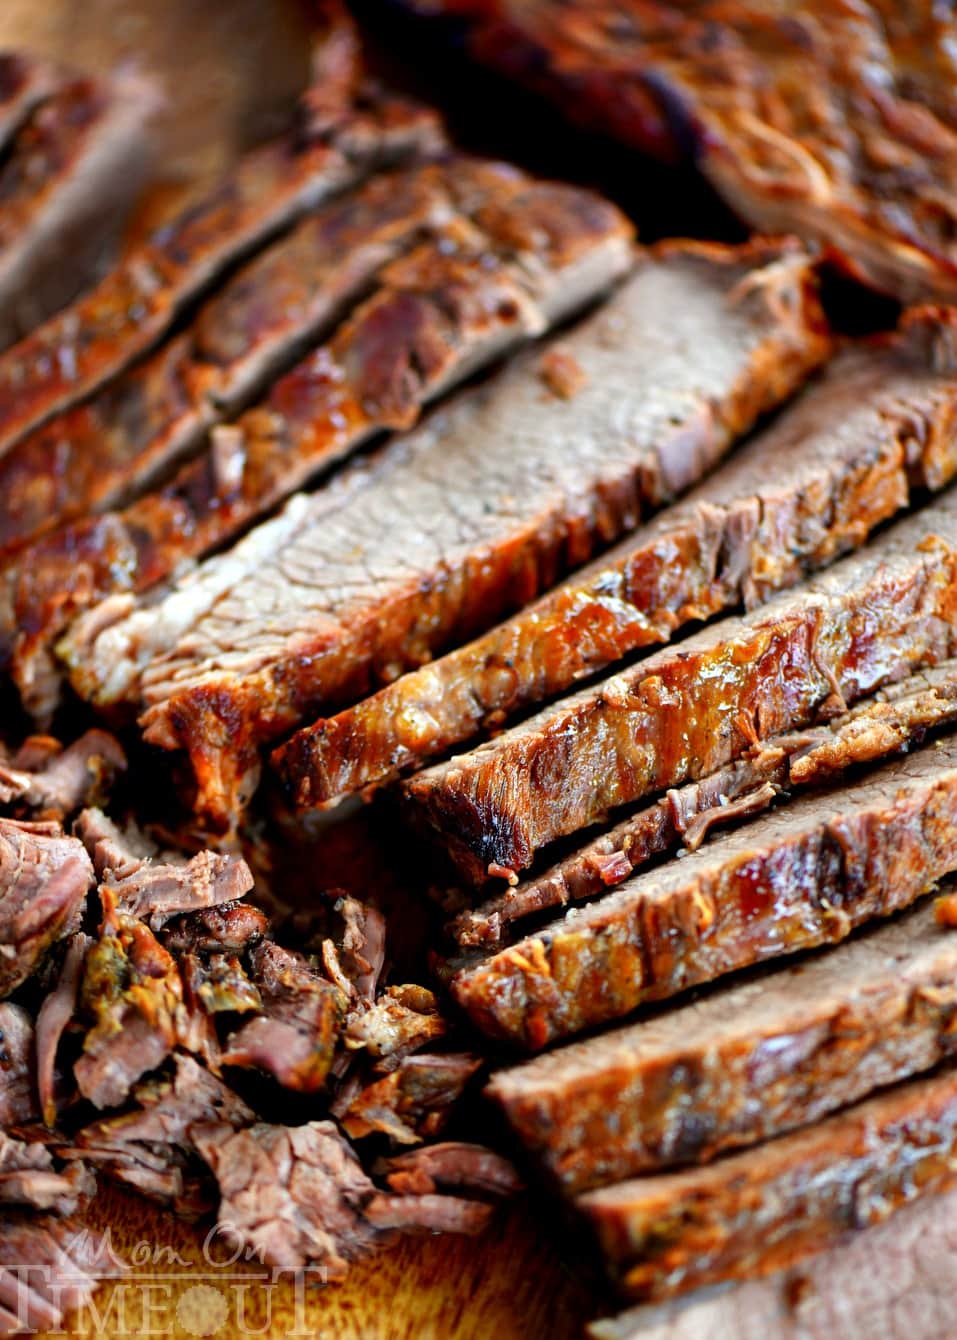 Your new favorite - Beef Brisket with Dr Pepper Barbecue Sauce! Feeding a crowd? Look no further for the perfect recipe to serve up from your grill! The Dr Pepper Barbecue Sauce is going to blow your mind! The perfect dinner recipe for your next BBQ or party!